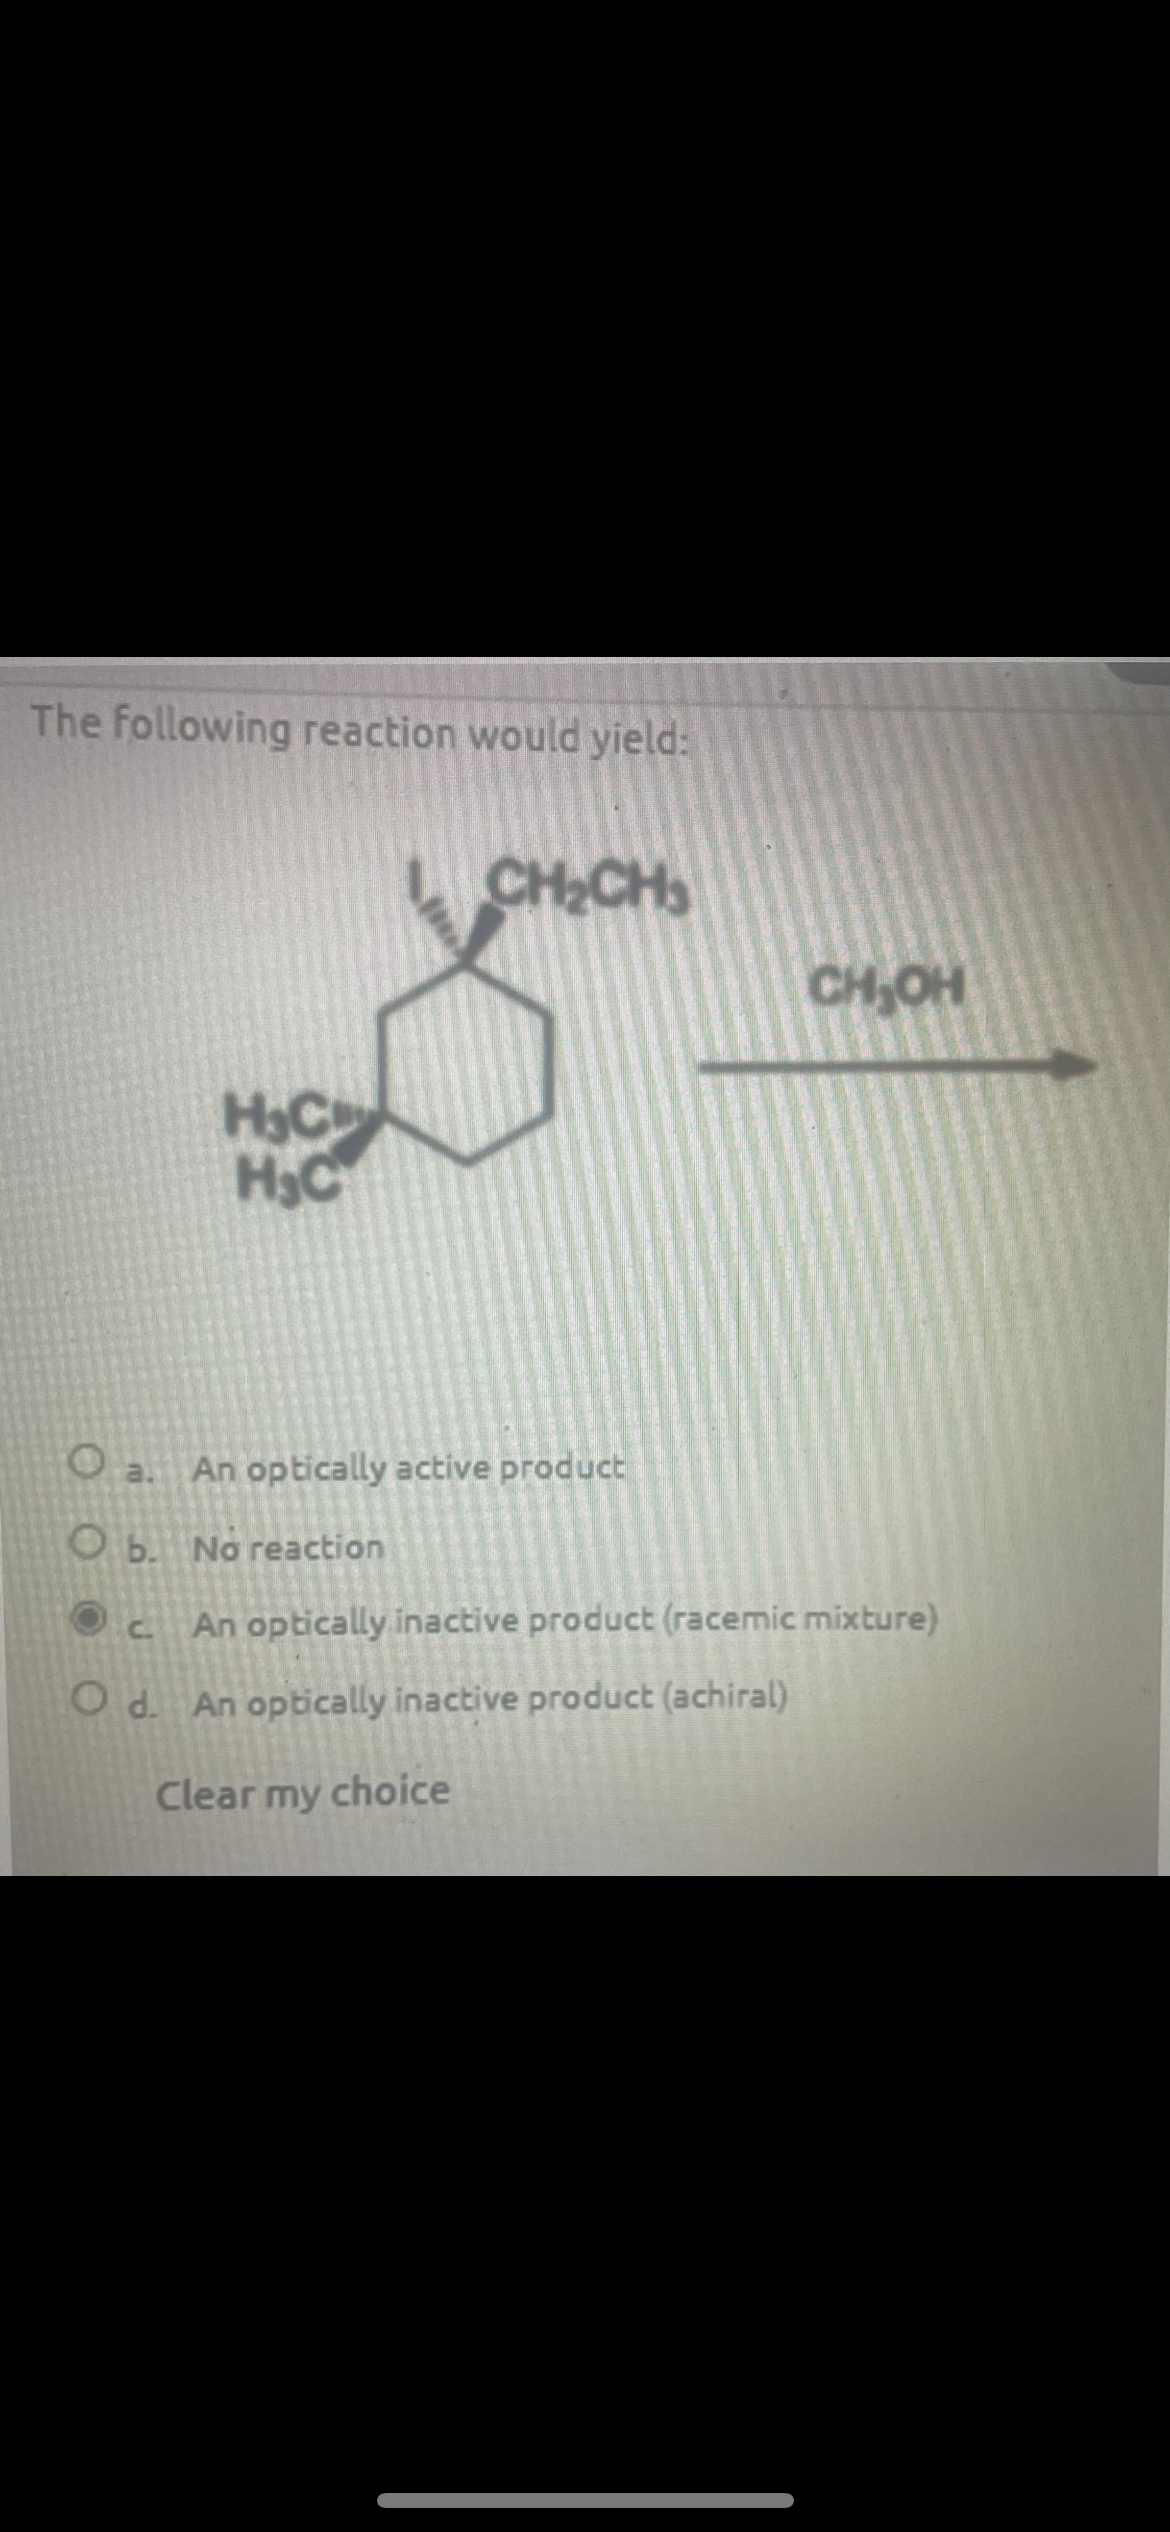 The following reaction would yield:
CH₂CH
H&C
H&C
CH₂OH
Oa. An optically active product
Ob. No reaction
Oc
An optically inactive product (racemic mixture)
Od. An optically inactive product (achiral)
Clear my choice